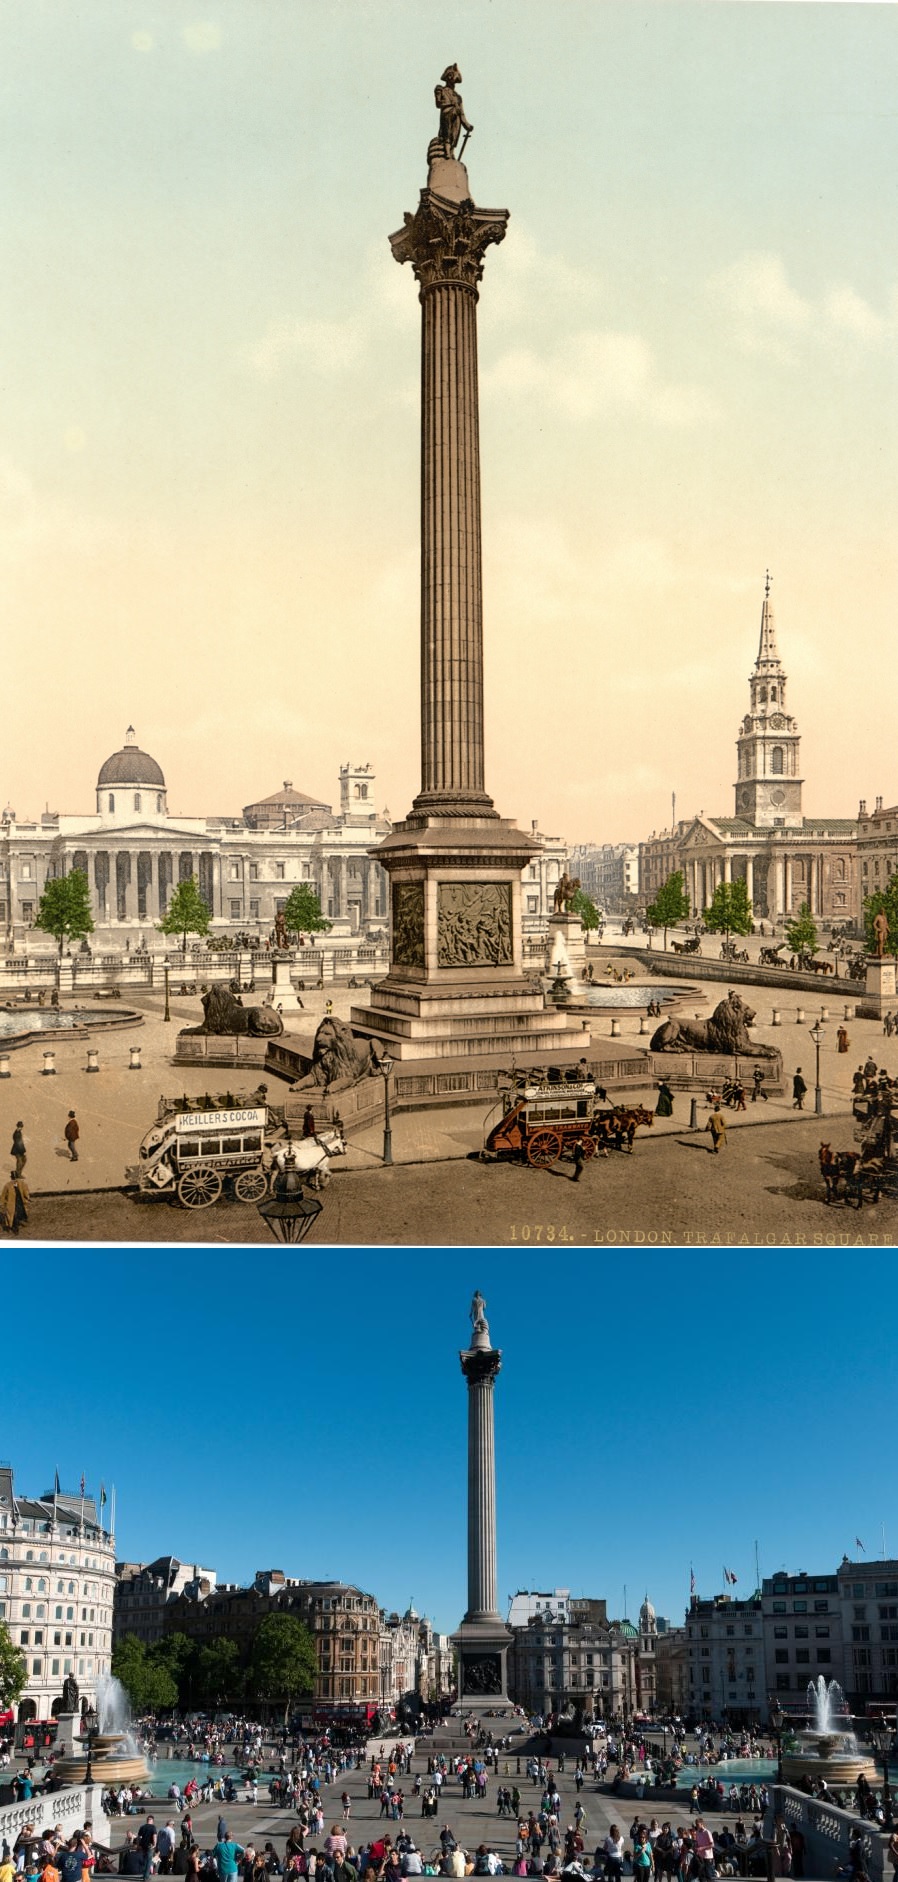 The huge monument of Nelson's Column sitting proudly in Trafalgar Square next to the National Gallery.